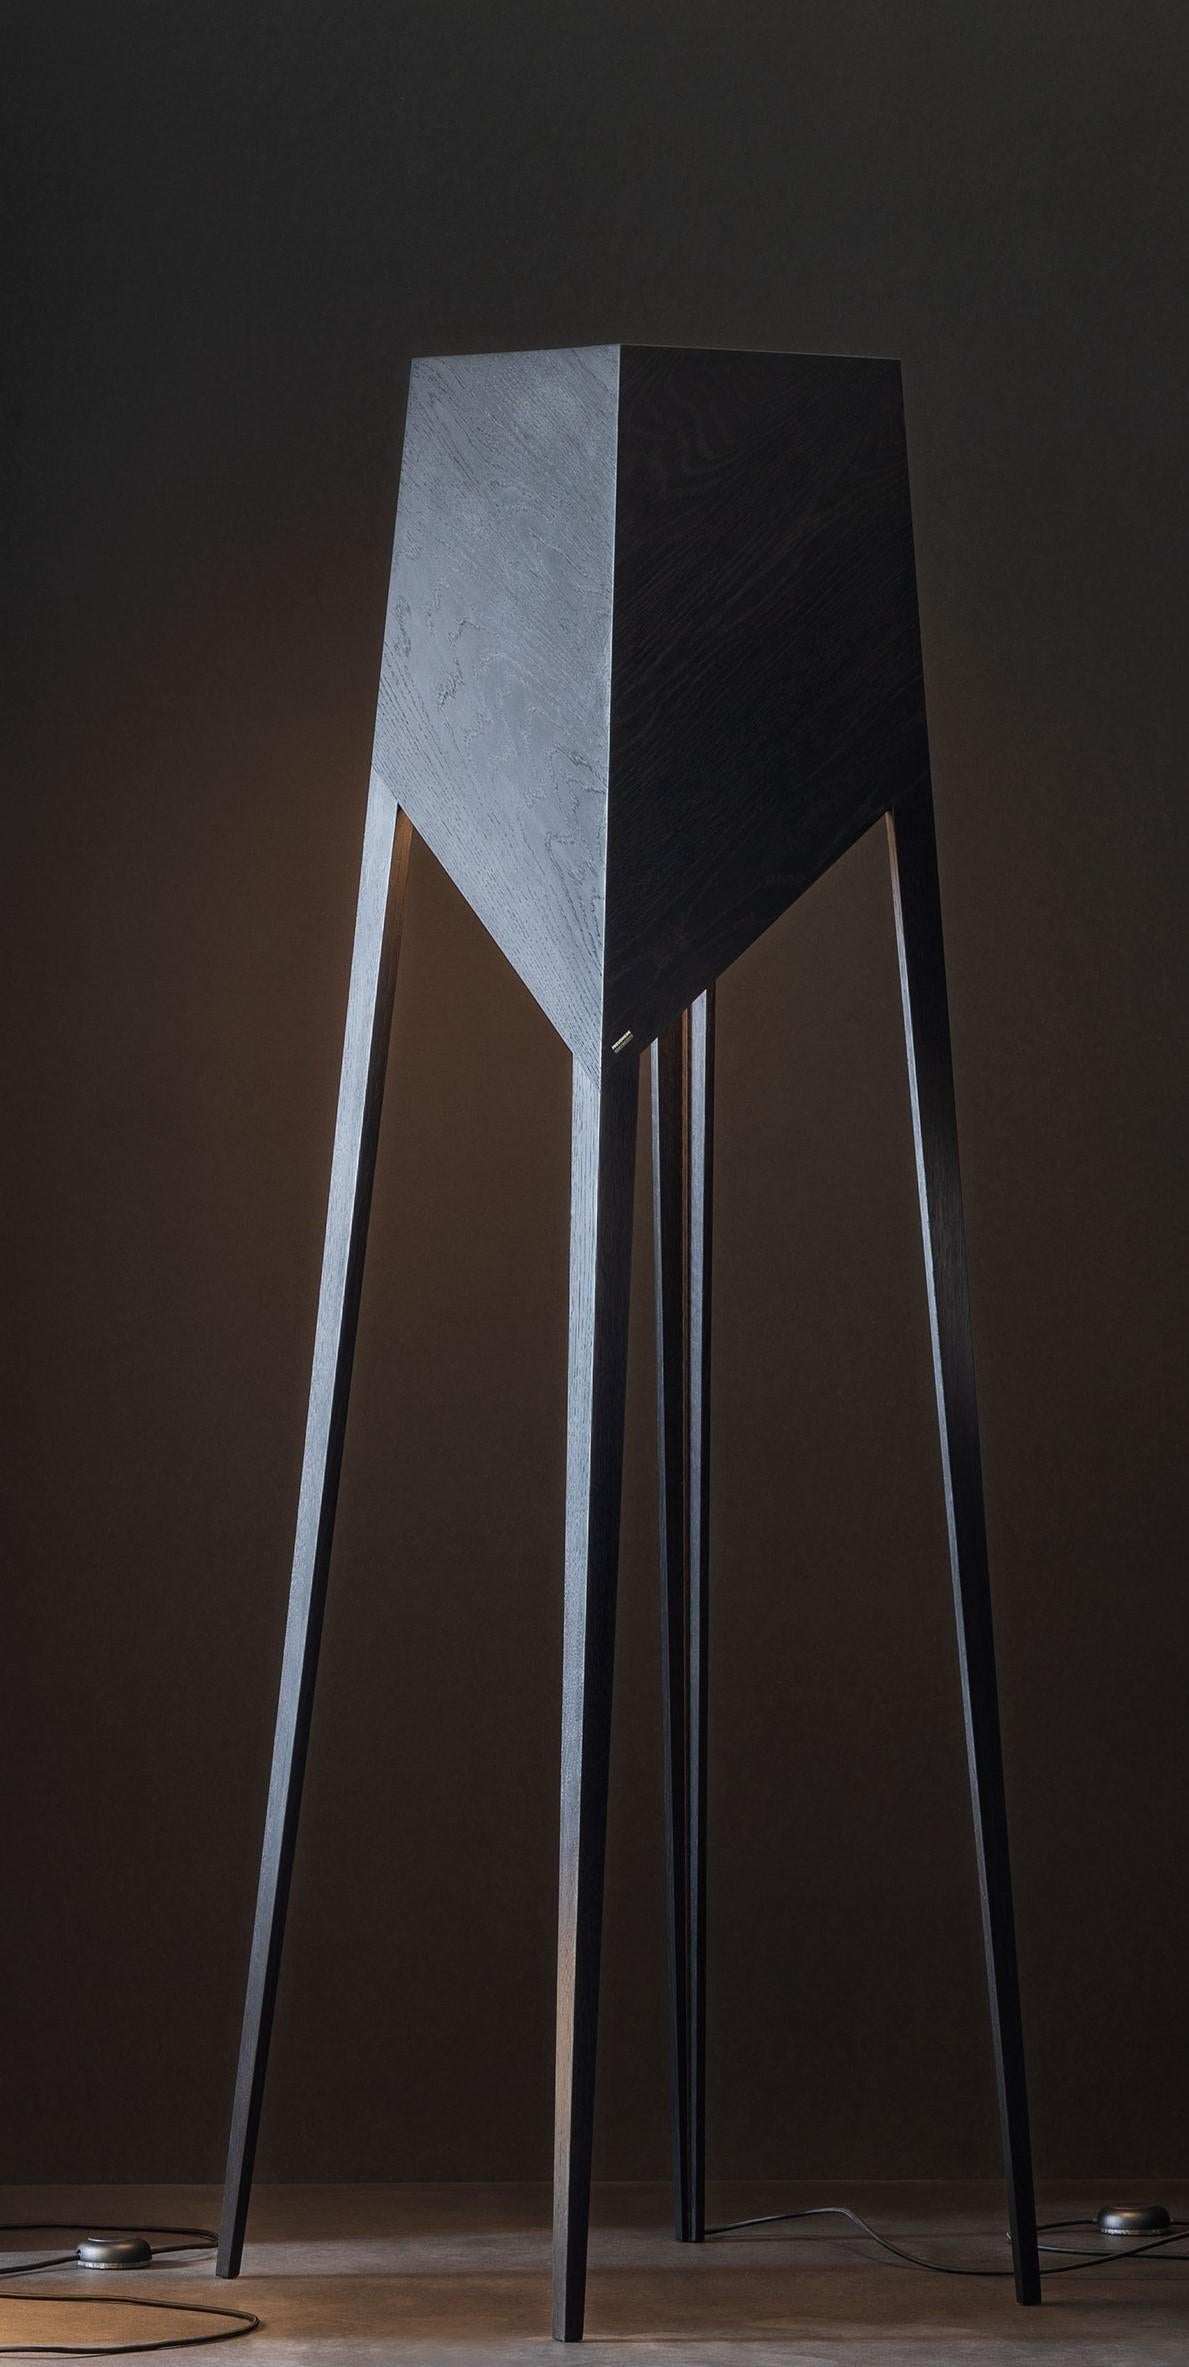 Black oak Luise Mum floor lamp by Matthias Scherzinger
Dimensions: H 185 x 55 cm
Materials: oak: black stained hard wax

All our lamps can be wired according to each country. If sold to the USA it will be wired for the USA for